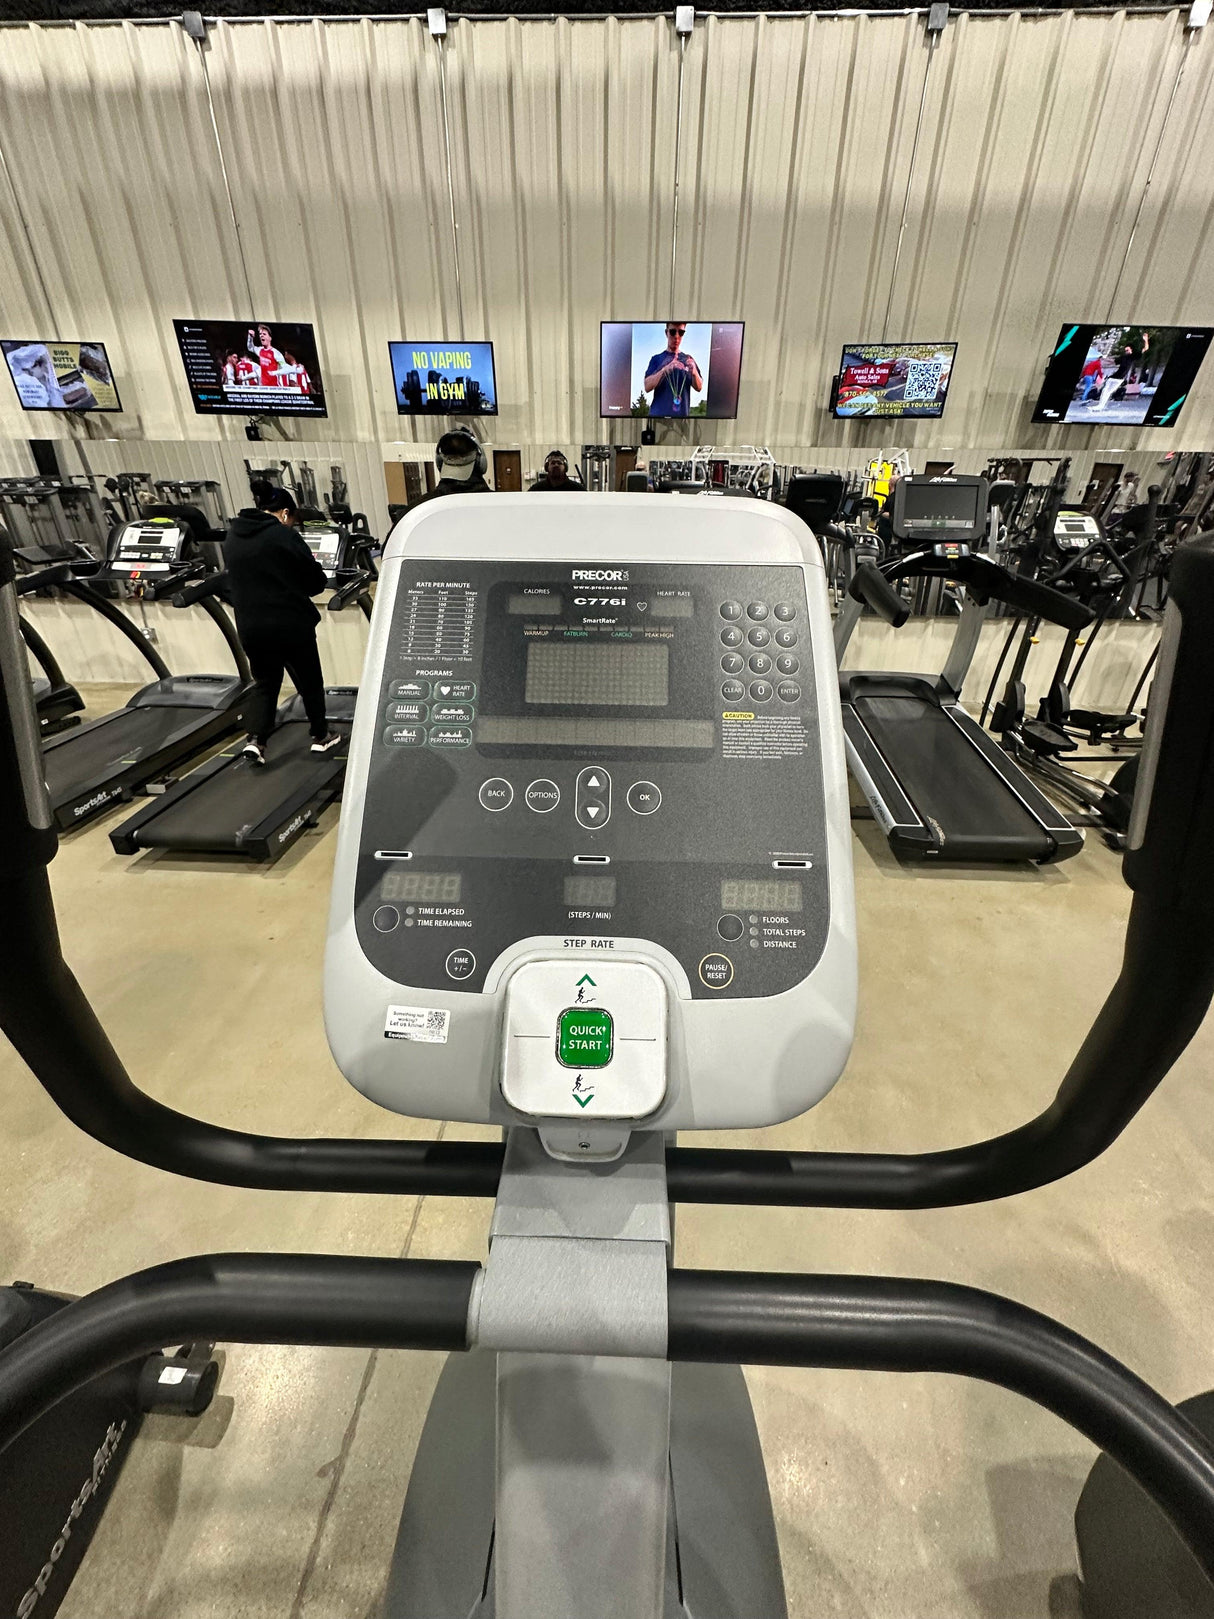 Pre-Owned Precor C776i Stepper - ExerciseUnlimited